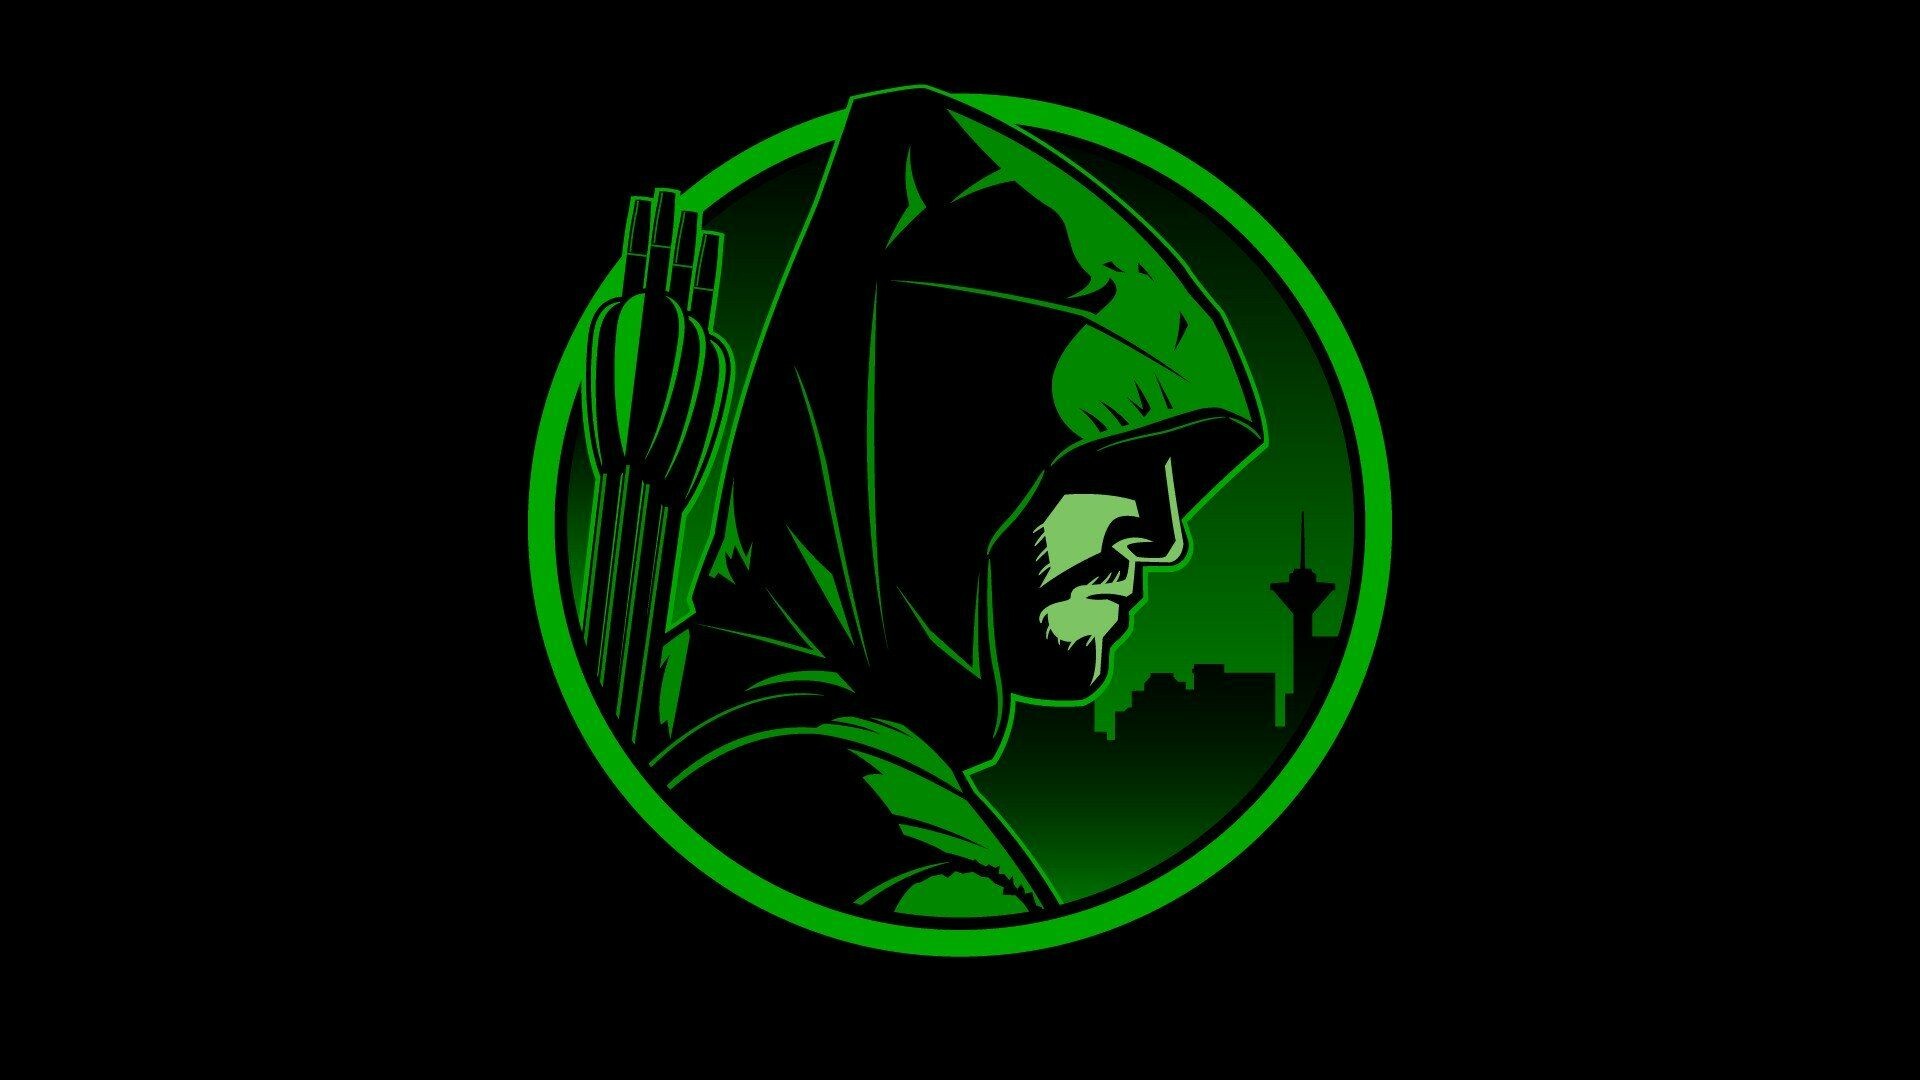 Green Arrow: DC comics superhero, Created in 1941 by Mort Weisinger and George Papp. 1920x1080 Full HD Wallpaper.